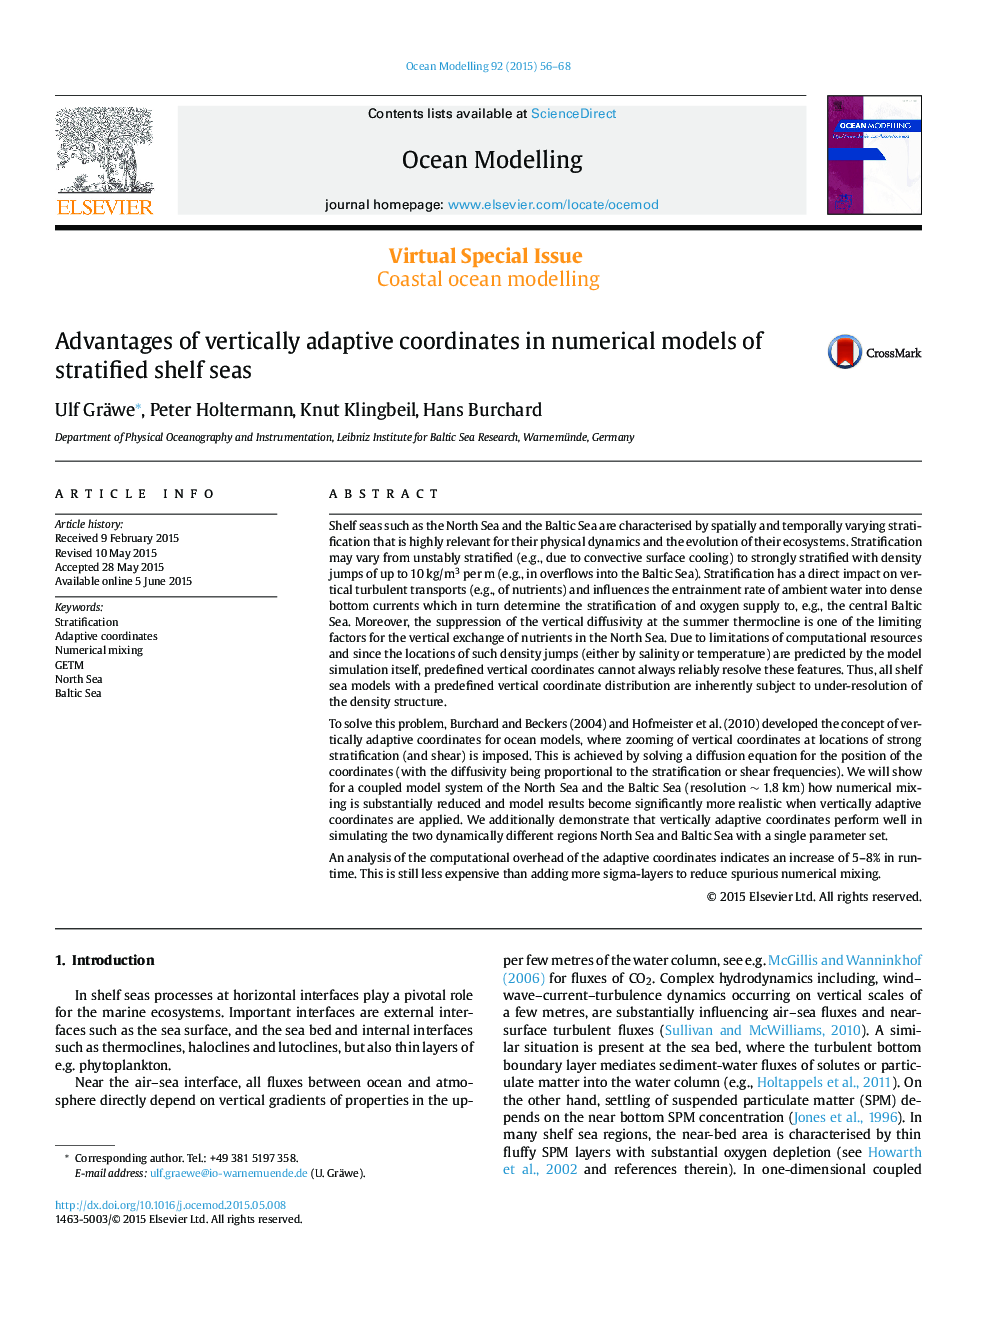 Virtual Special Issue: Coastal ocean modellingAdvantages of vertically adaptive coordinates in numerical models of stratified shelf seas